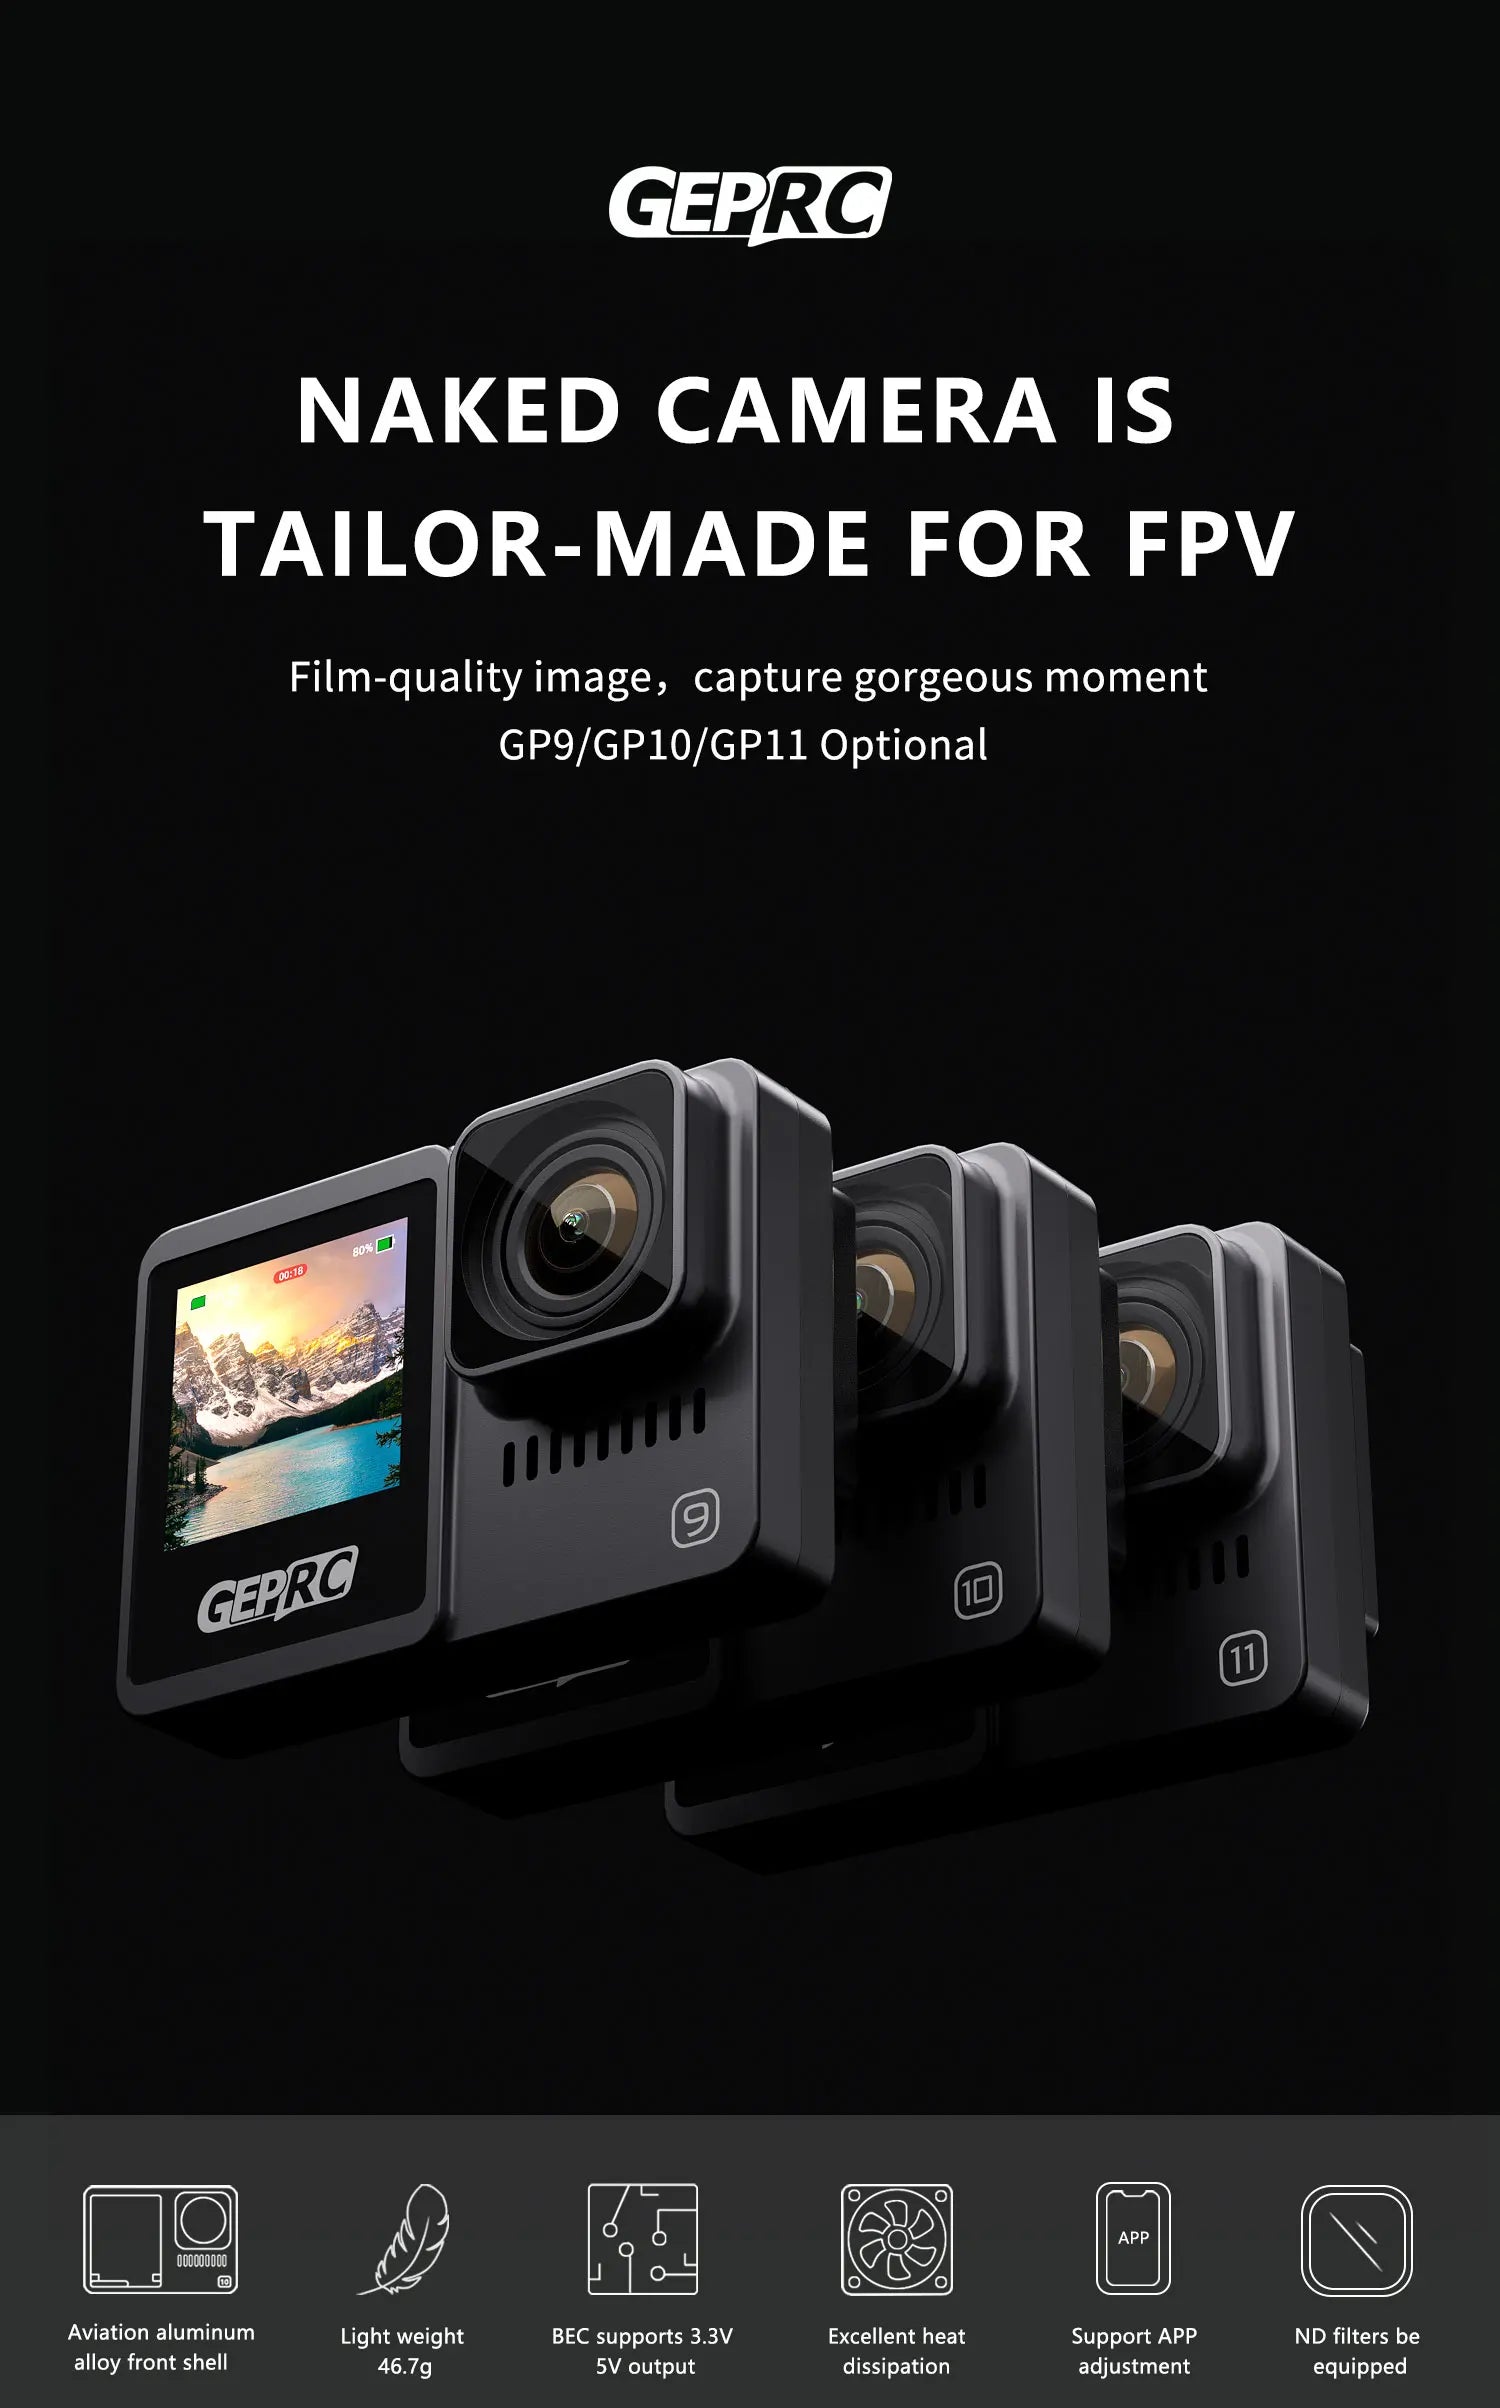 GEPRC Naked Camera, GEPRC NAKED CAMEERA IS TAILOR-MADE FOR FP